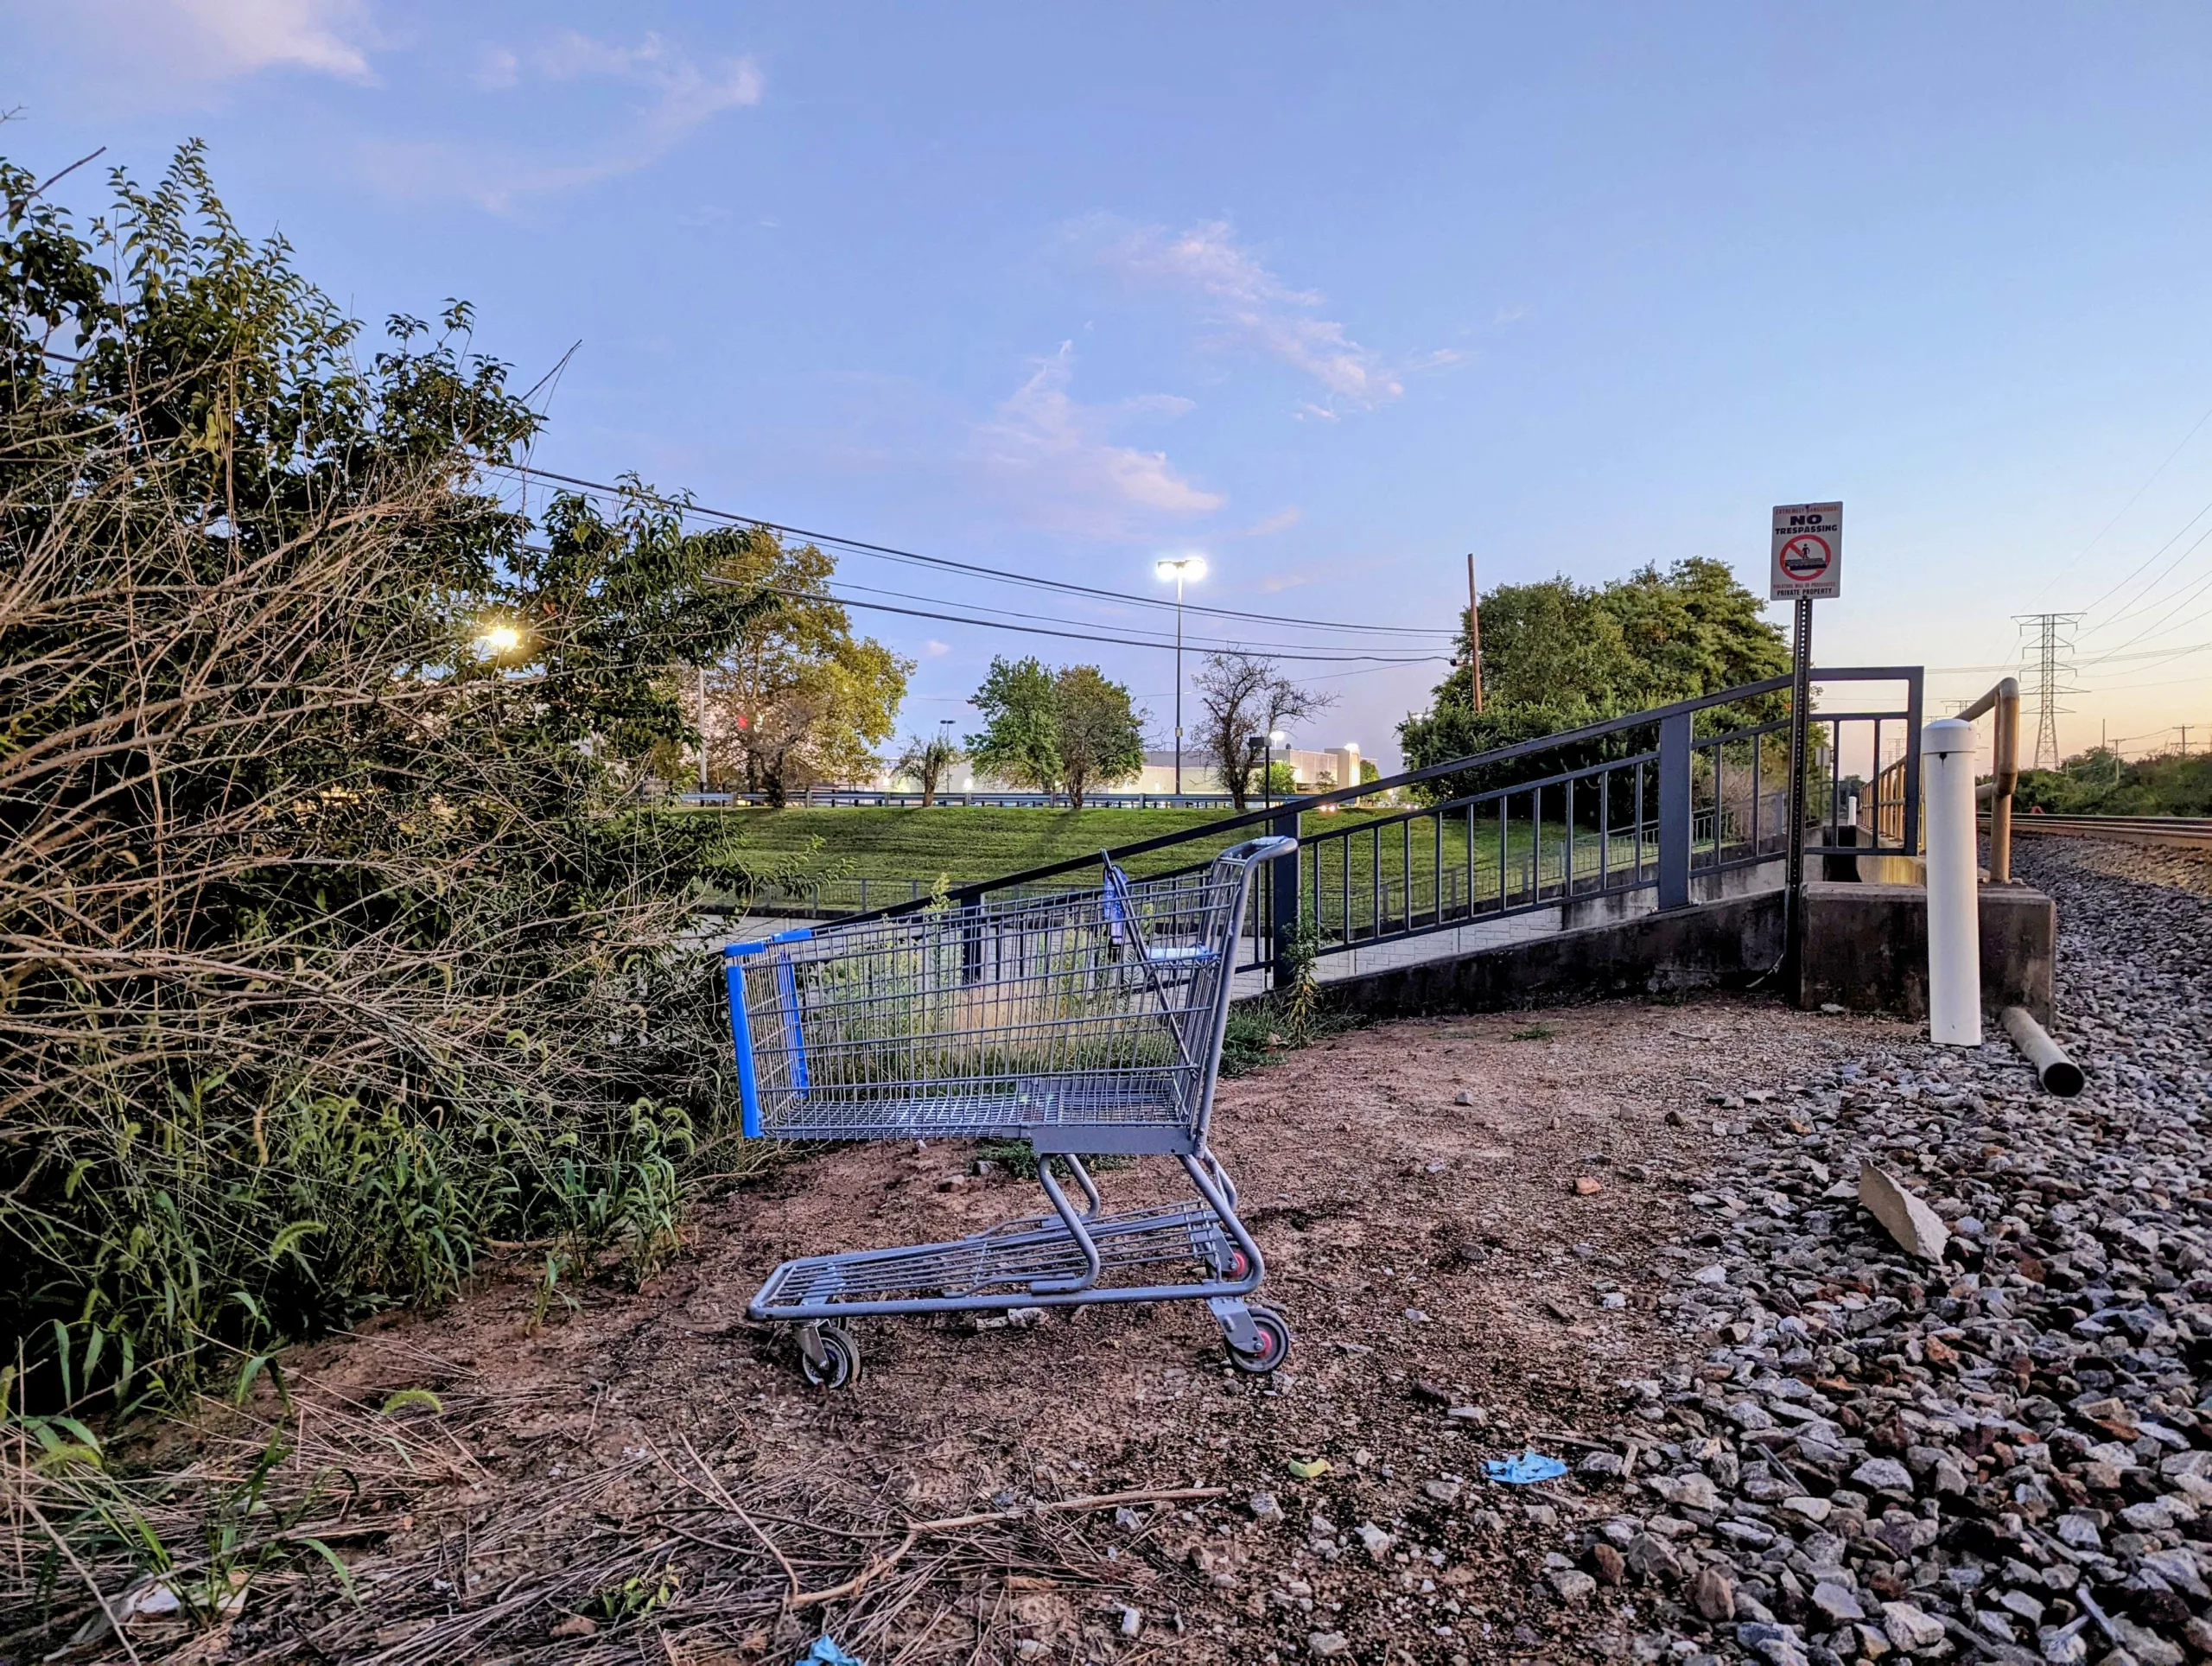 A shopping cart sits "across the tracks" from Fayette Mall. (The Lexington Times)